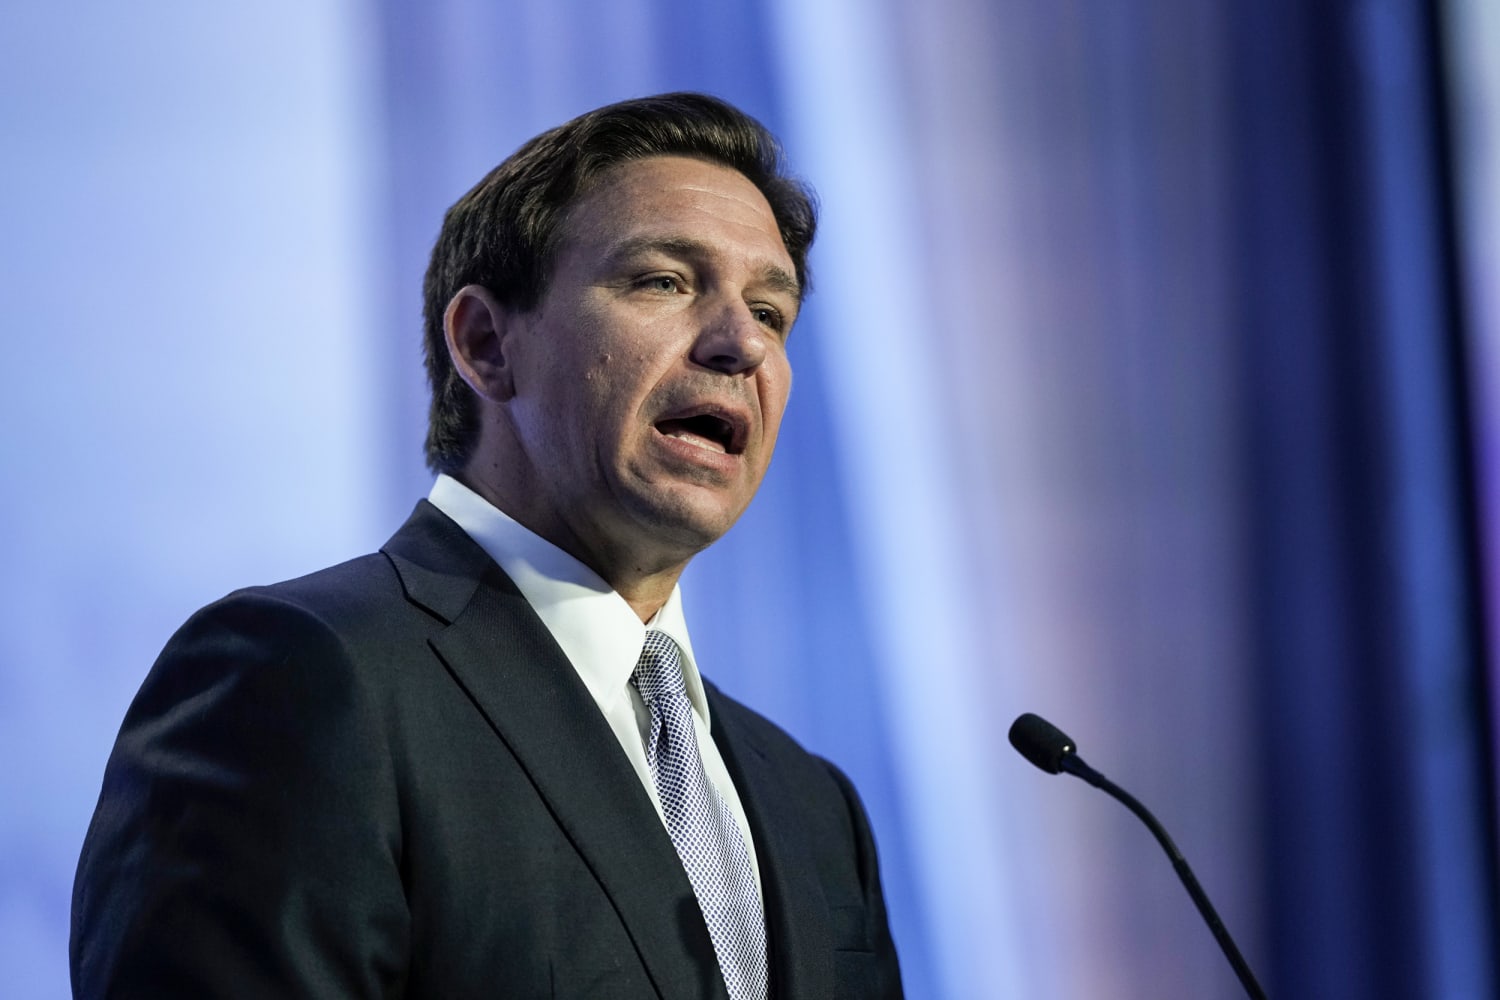 Ron DeSantis says he would consider Iowa Gov. Kim Reynolds as his running mate